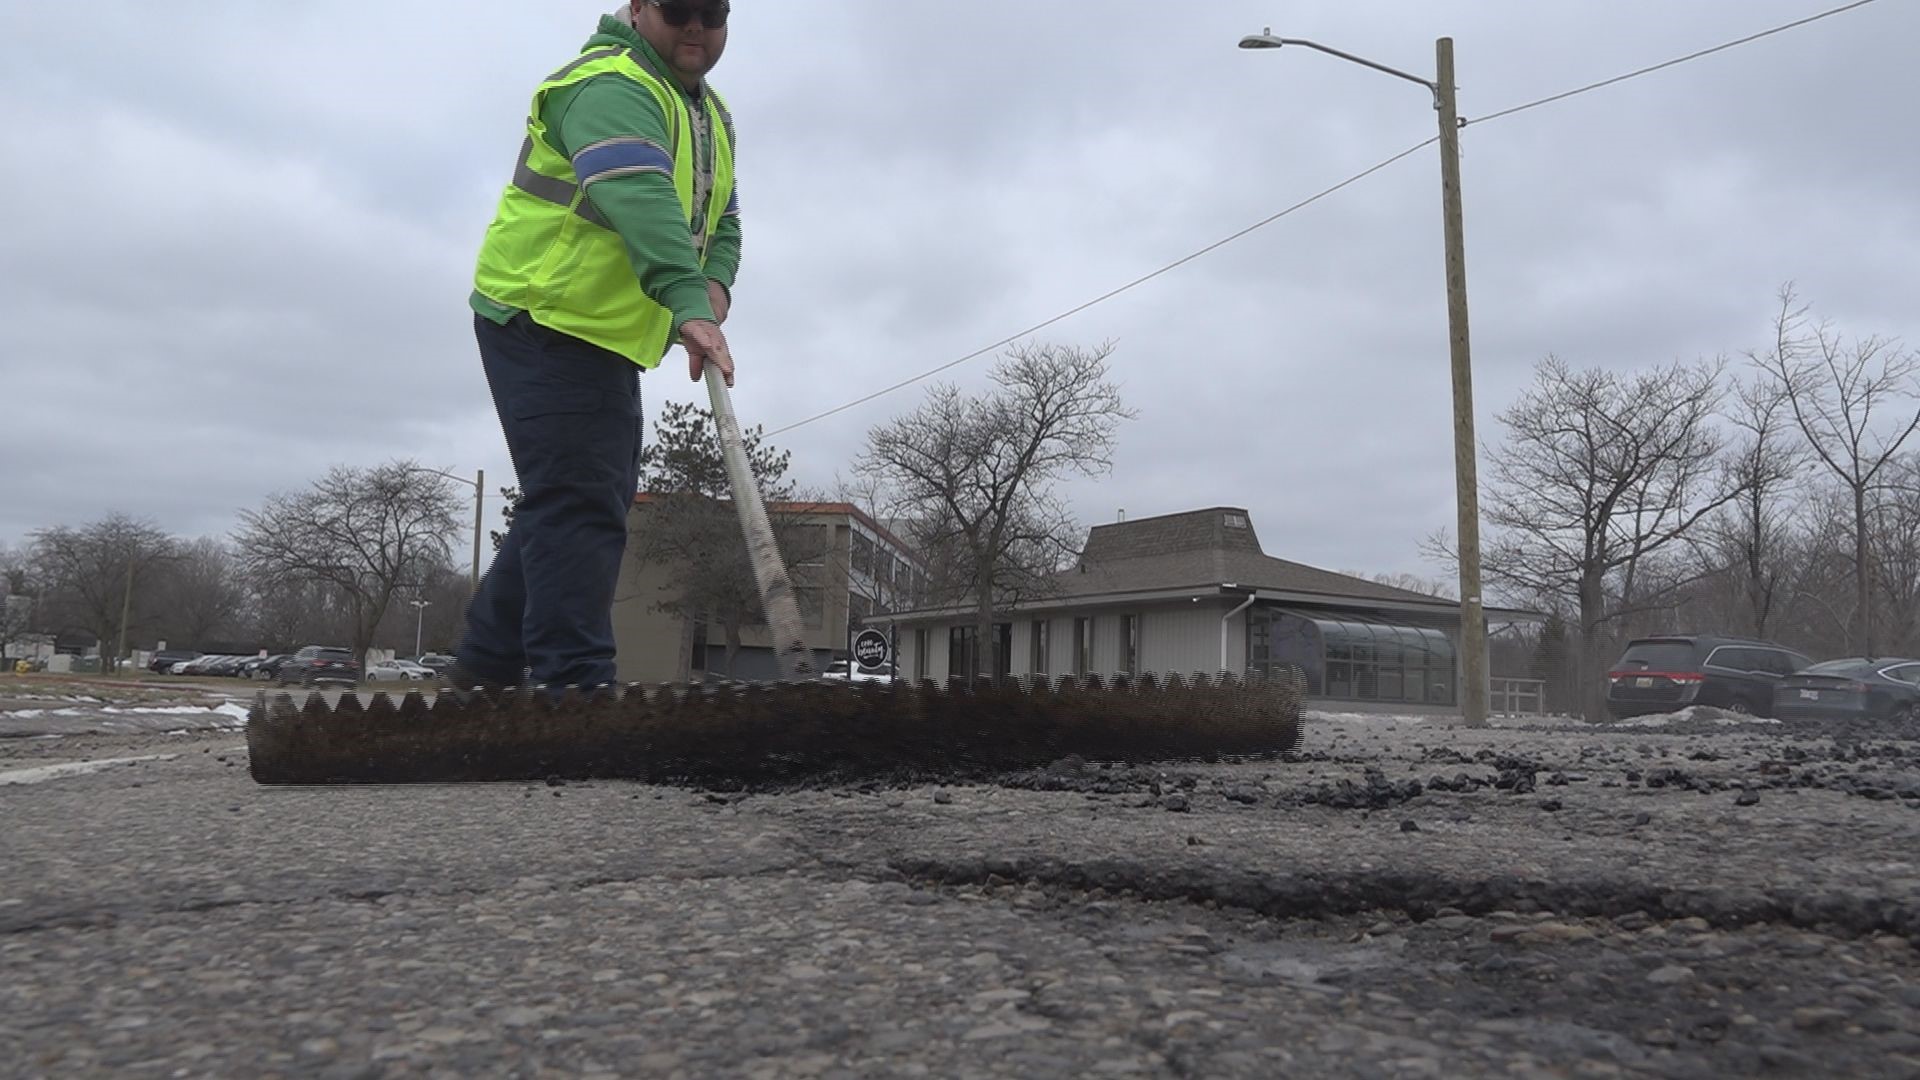 Crews are out filling potholes with cold patches. They pay attention to frequently patched roads this time of year, to determine repair projects.